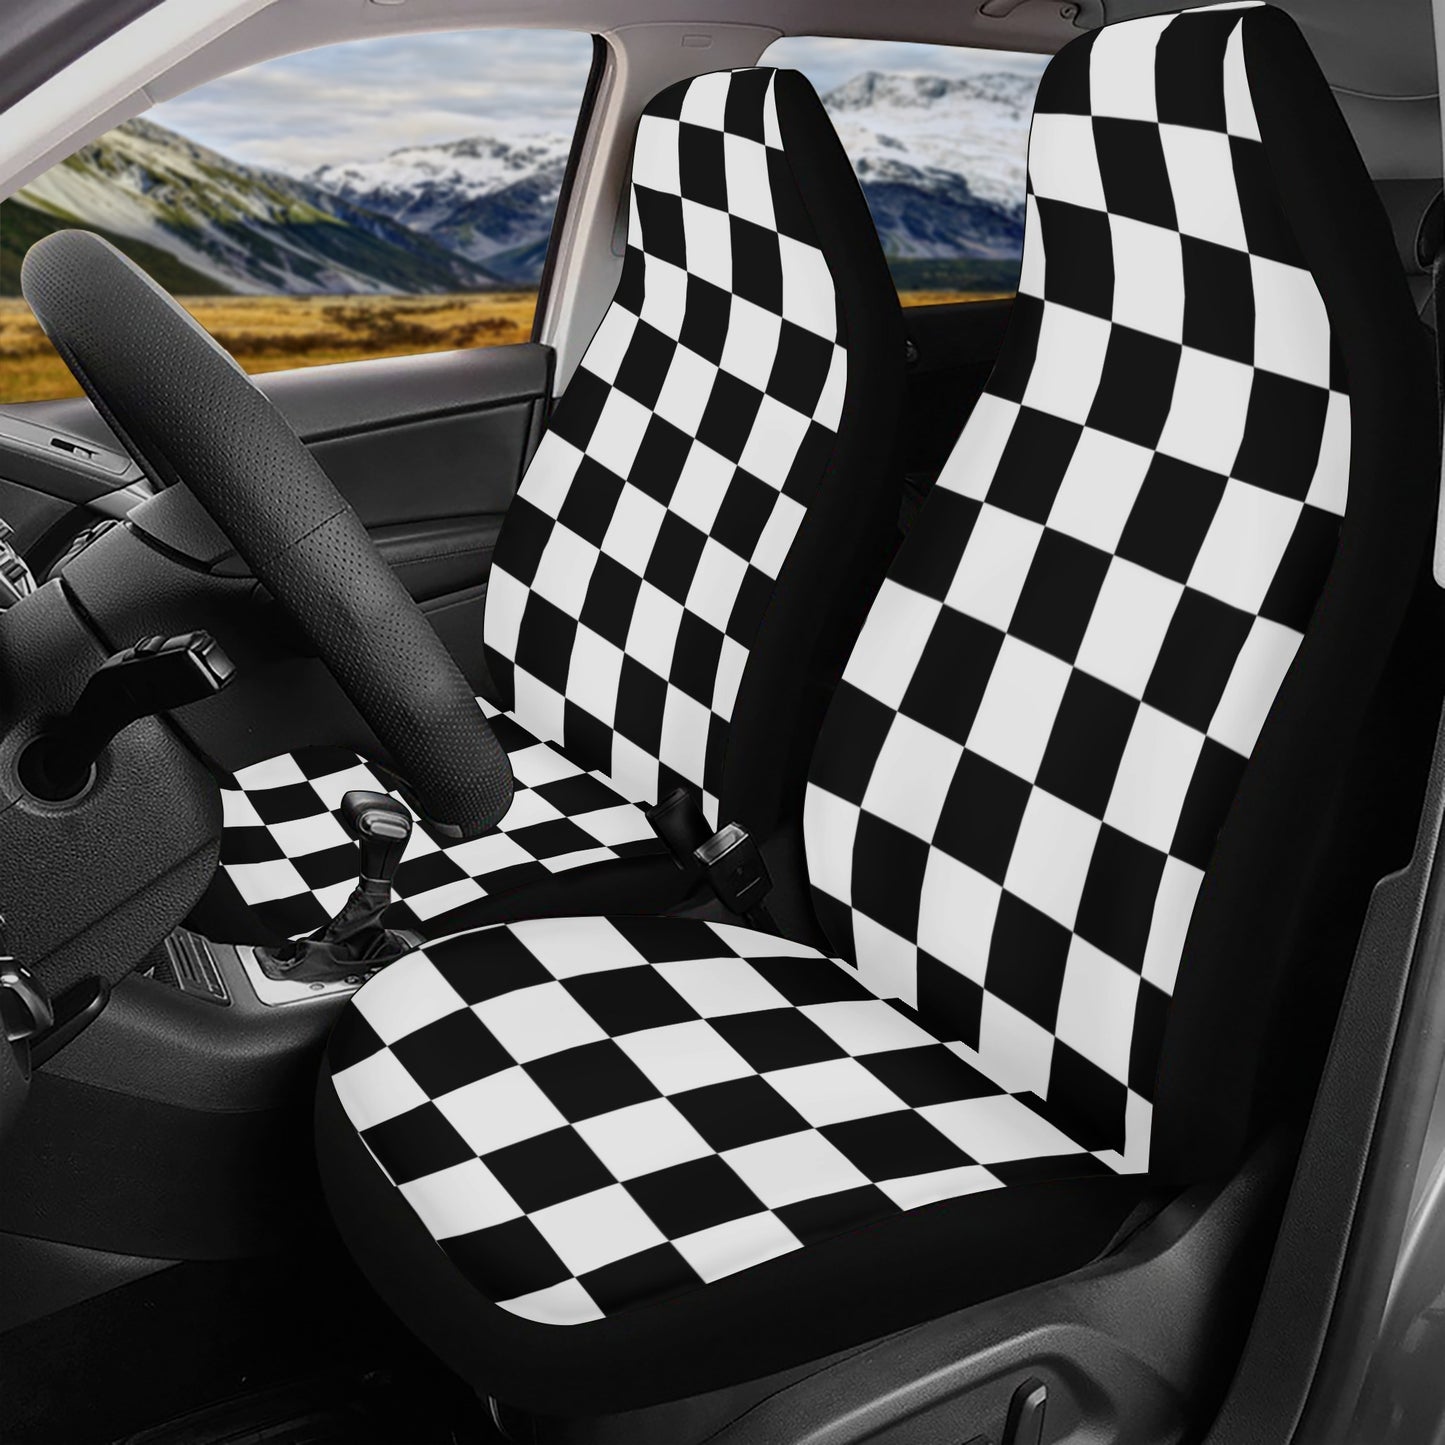 Checkered Front and Back Car Seat Covers Full Set (3 pcs), Black White Check Auto Front Dog Pet Vehicle SUV Universal Protector Men Women